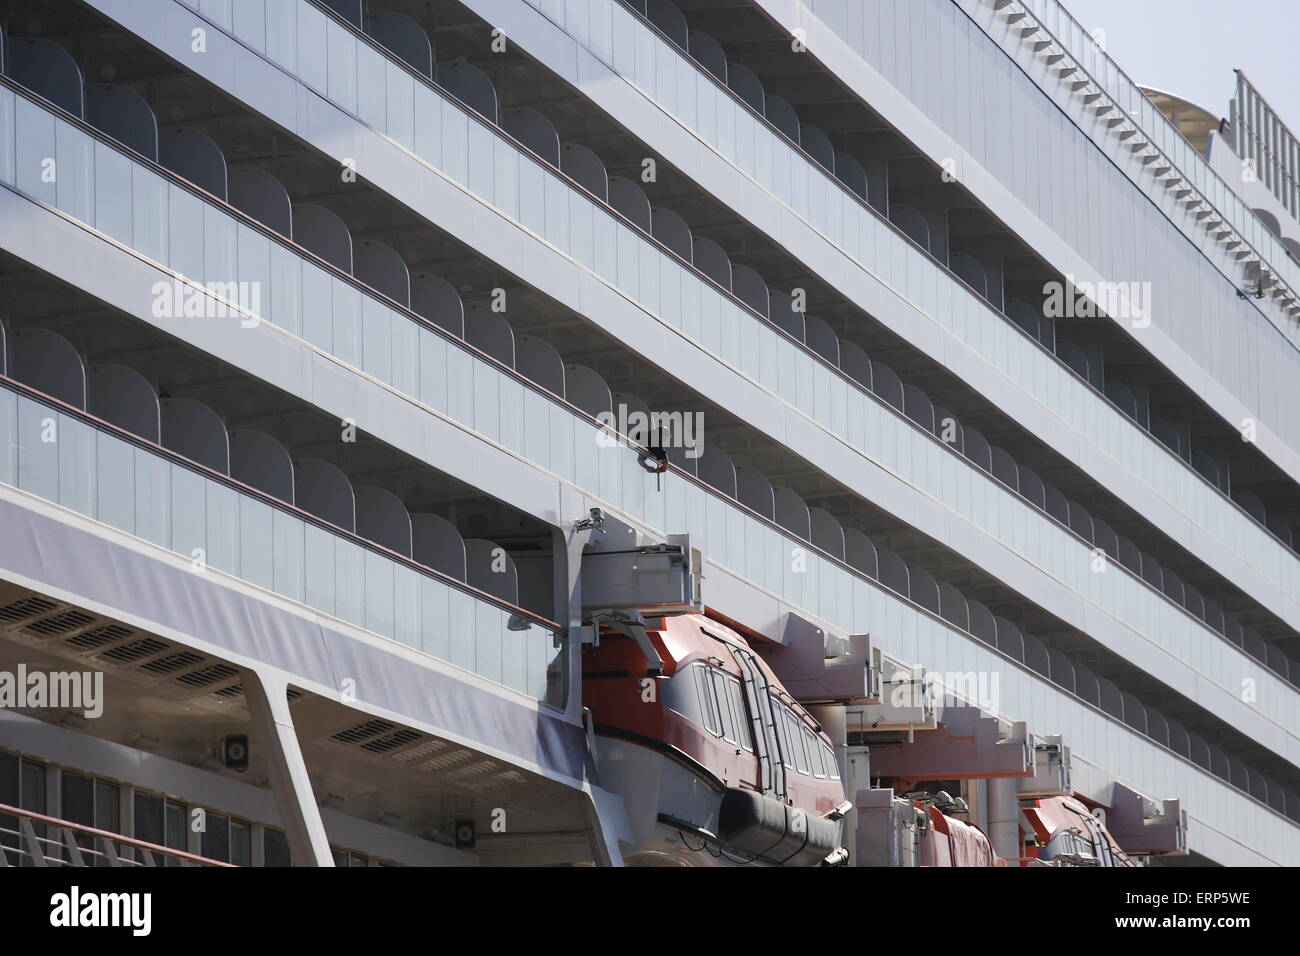 Gdynia,Poland, 6th, June 2015 The Viking Star criuse ship under the Norwegian flag sits at Gdynia port. The ship is  228 metres long and 29 metres wide. It can take 930 passangers and has 602 crew members Credit:  Michal Fludra/Alamy Live News Stock Photo